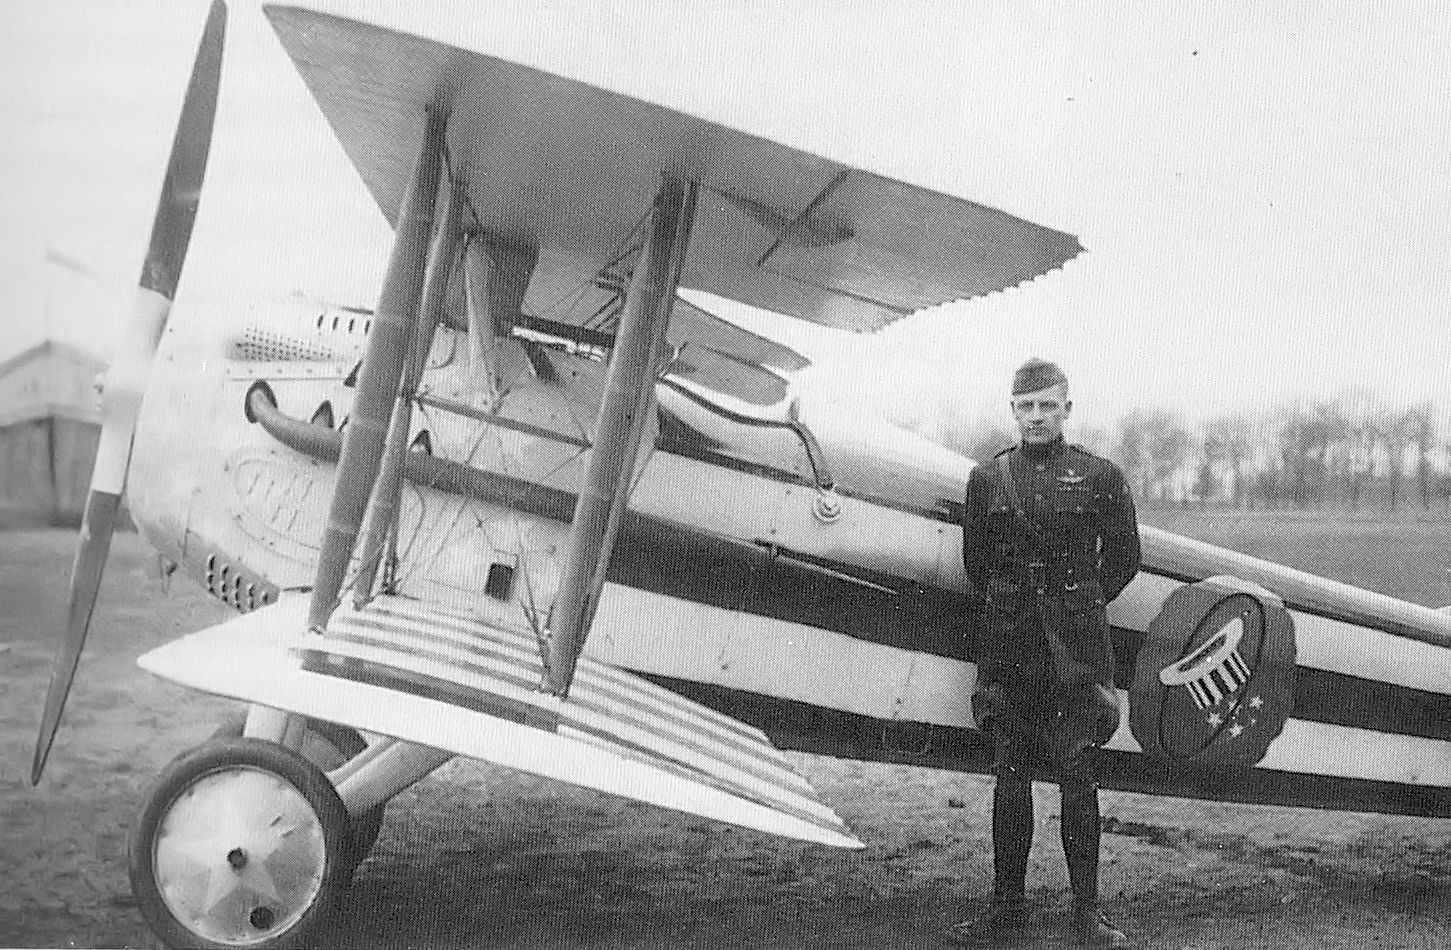 Major Reed Chambers, AEF 94th Pursuit Squadron, pictured in front of a plane in France, 1918.